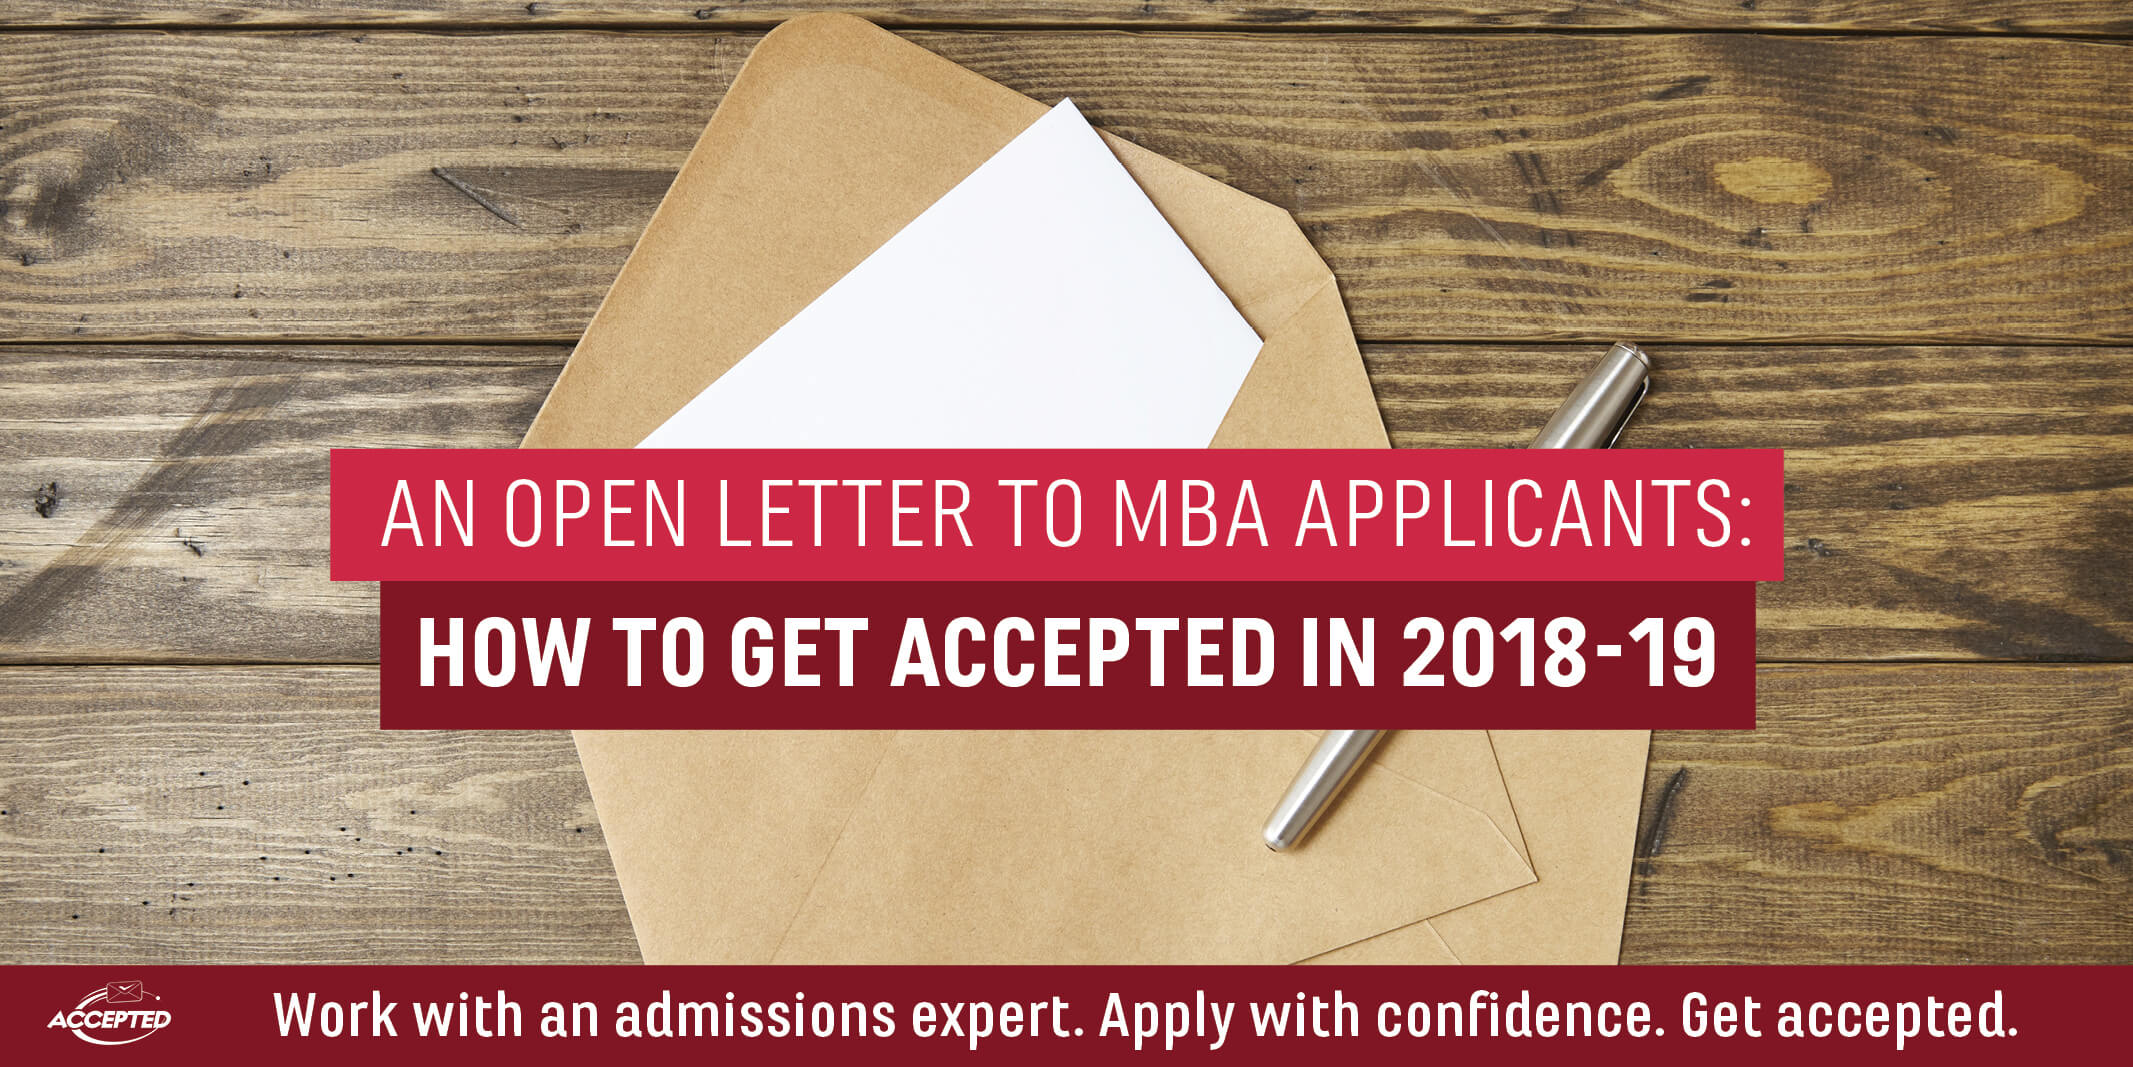 2018-19 MBA Applicants How to Get Accepted